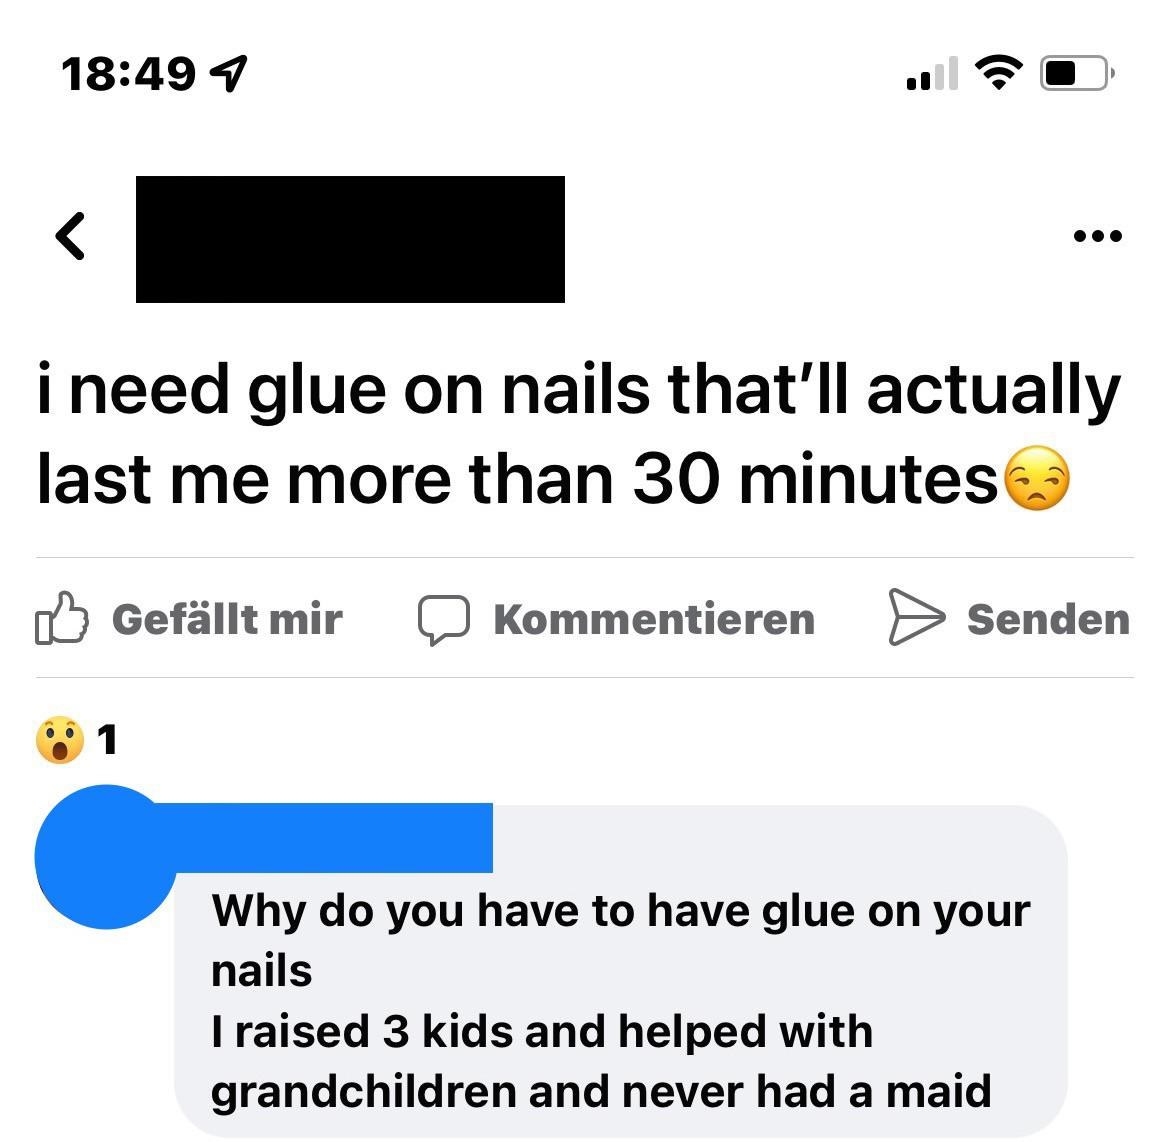 &quot;I need glue-on nails that&#x27;ll actually last me more than 30 minutes,&quot; and response: Why do you have to have glue on your nails? I raised 3 kids and helped with grandchildren and never had a maid&quot;